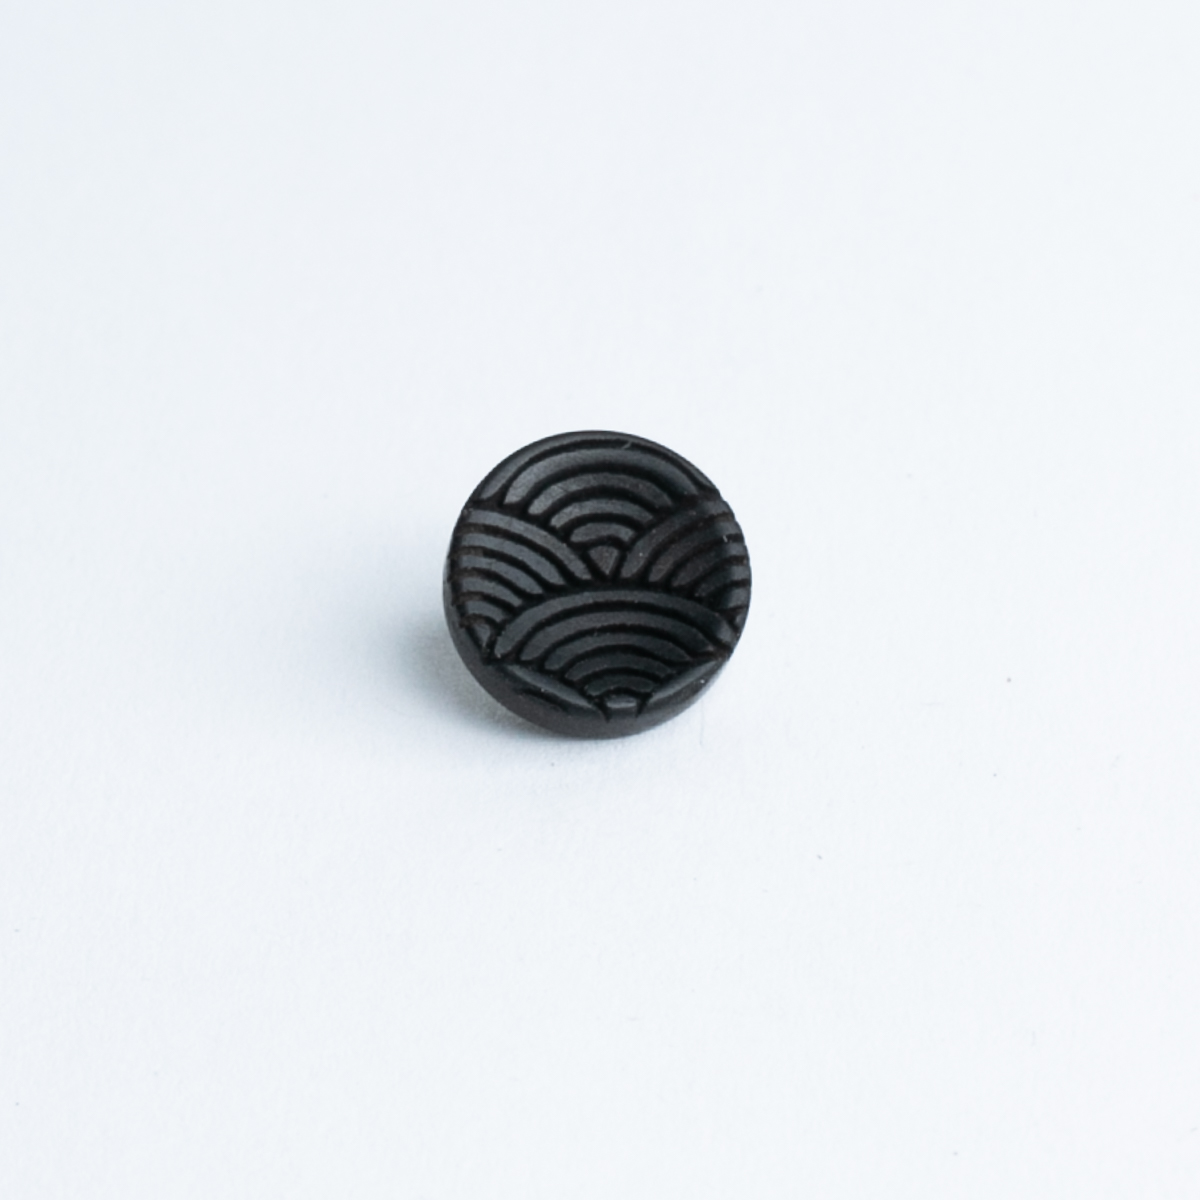 Blood wood Soft Release Button for Fujifilm and Leica Large Convex 